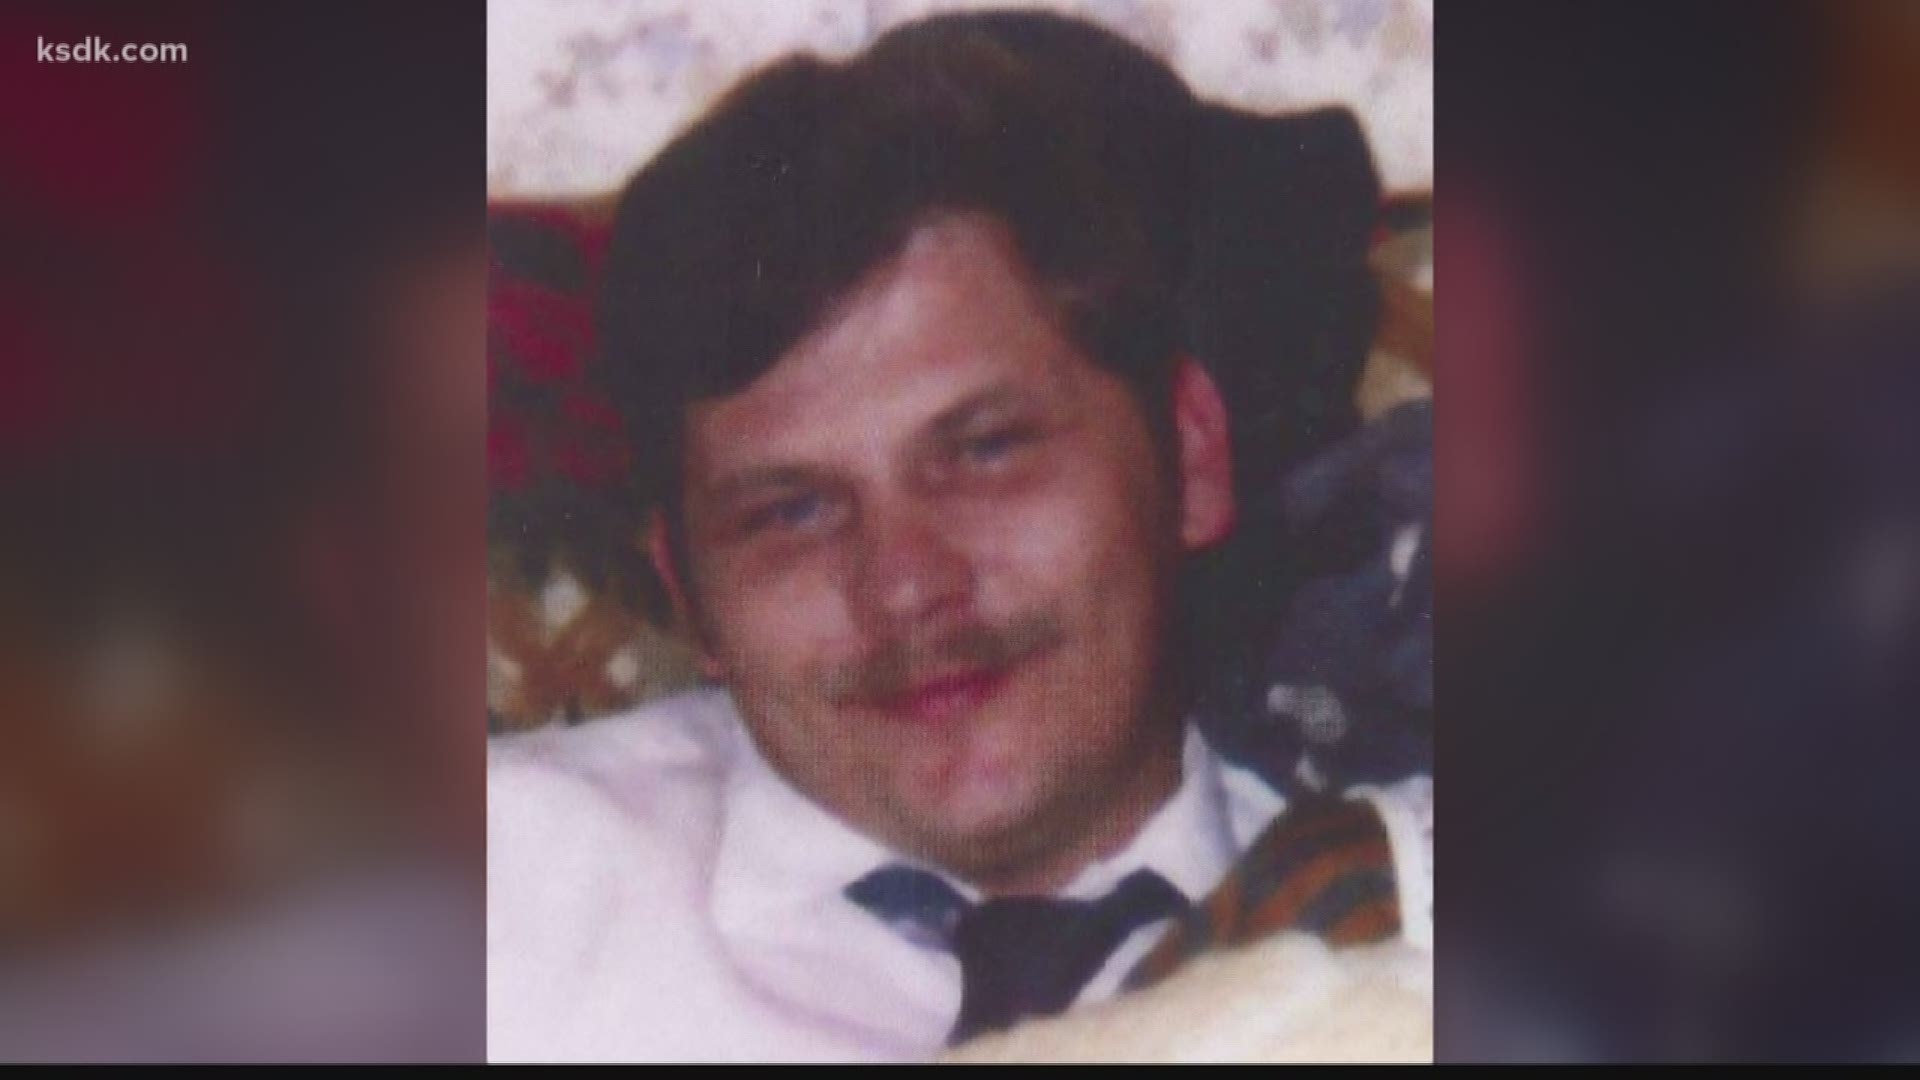 The 5 On Your Side I-team has been working to find out more about the Earl Webster Cox, the man charged with the murder of Angie Housman. investigative Reporter Jacob Long reports.